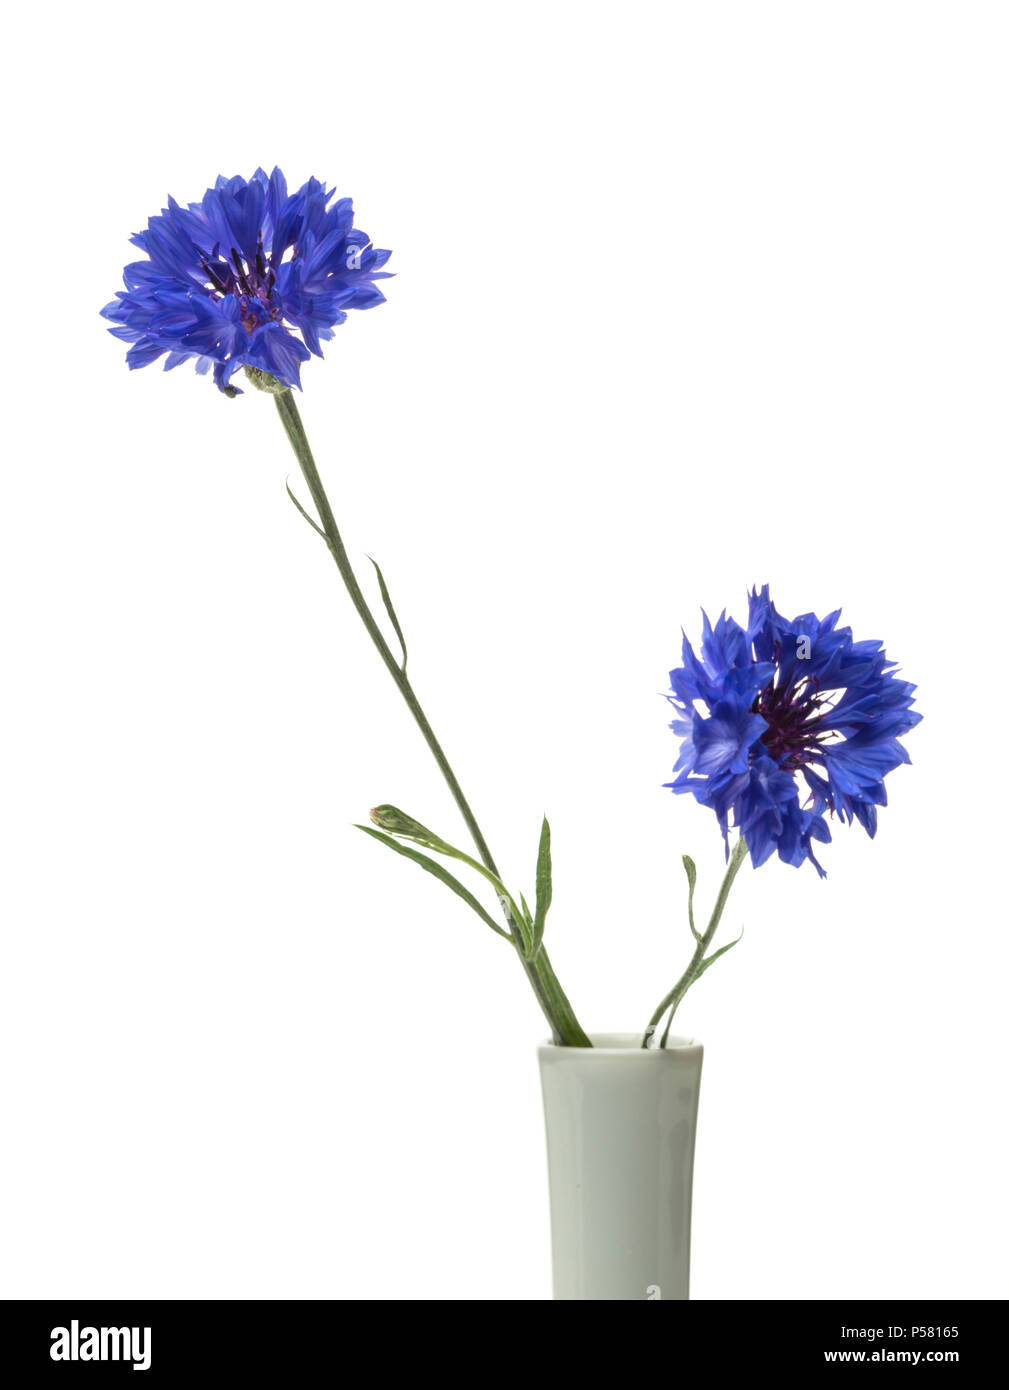 Centaurea cyanus or cornflower blossoms in a vase isolated on white background Stock Photo